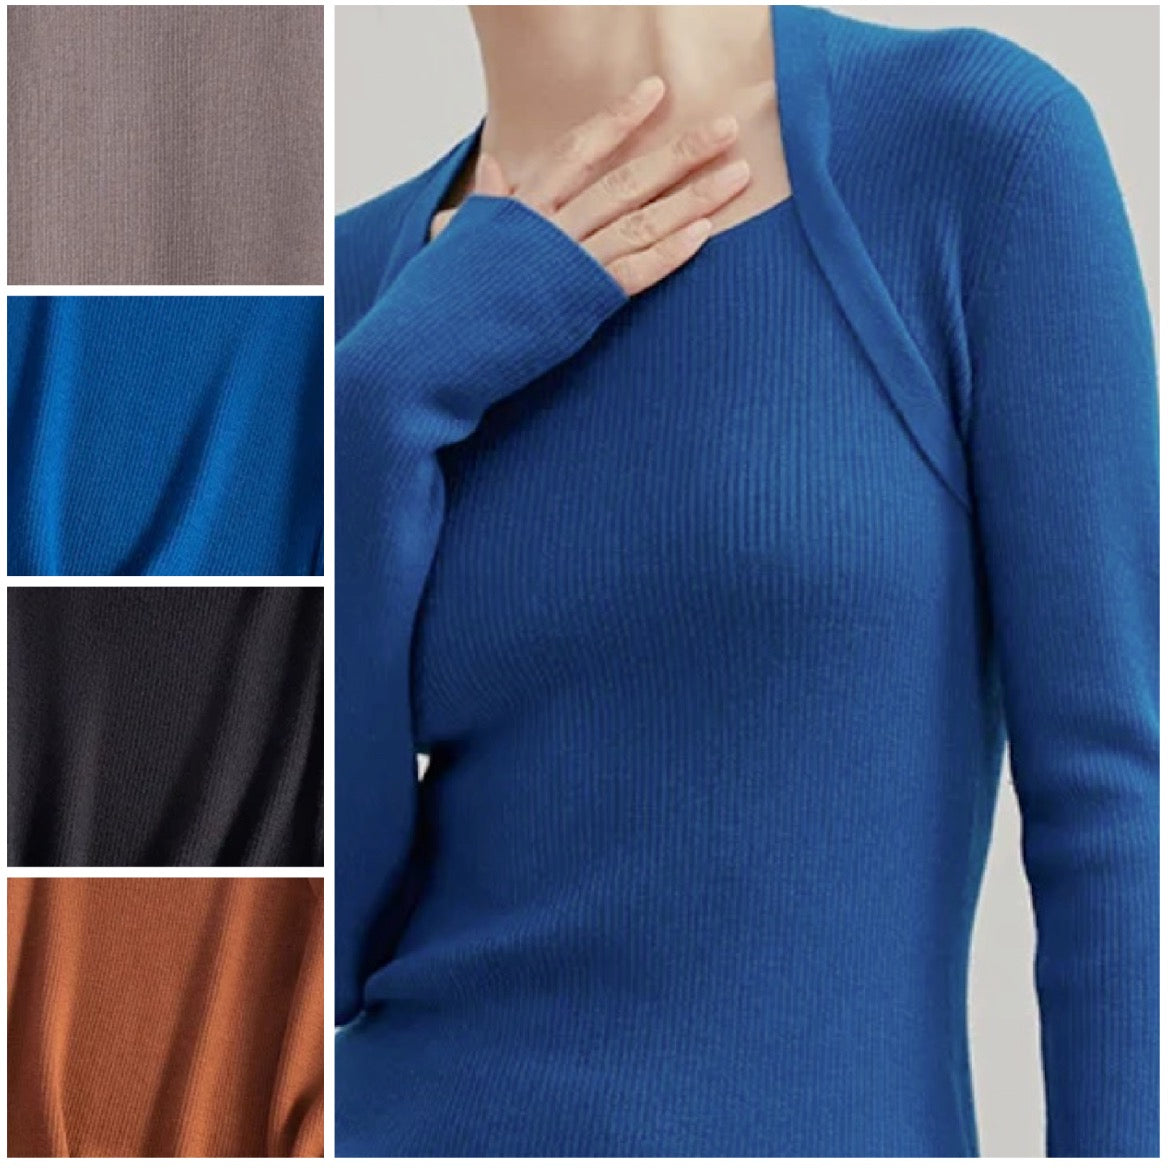 Shop This Merino Wool Ribknit Fitted Top is a stylish and comfortable choice for everyday wear. Crafted from exceptionally soft and stretchy merino wool, it offers a snug yet comfortable fit that adapts to your shape.